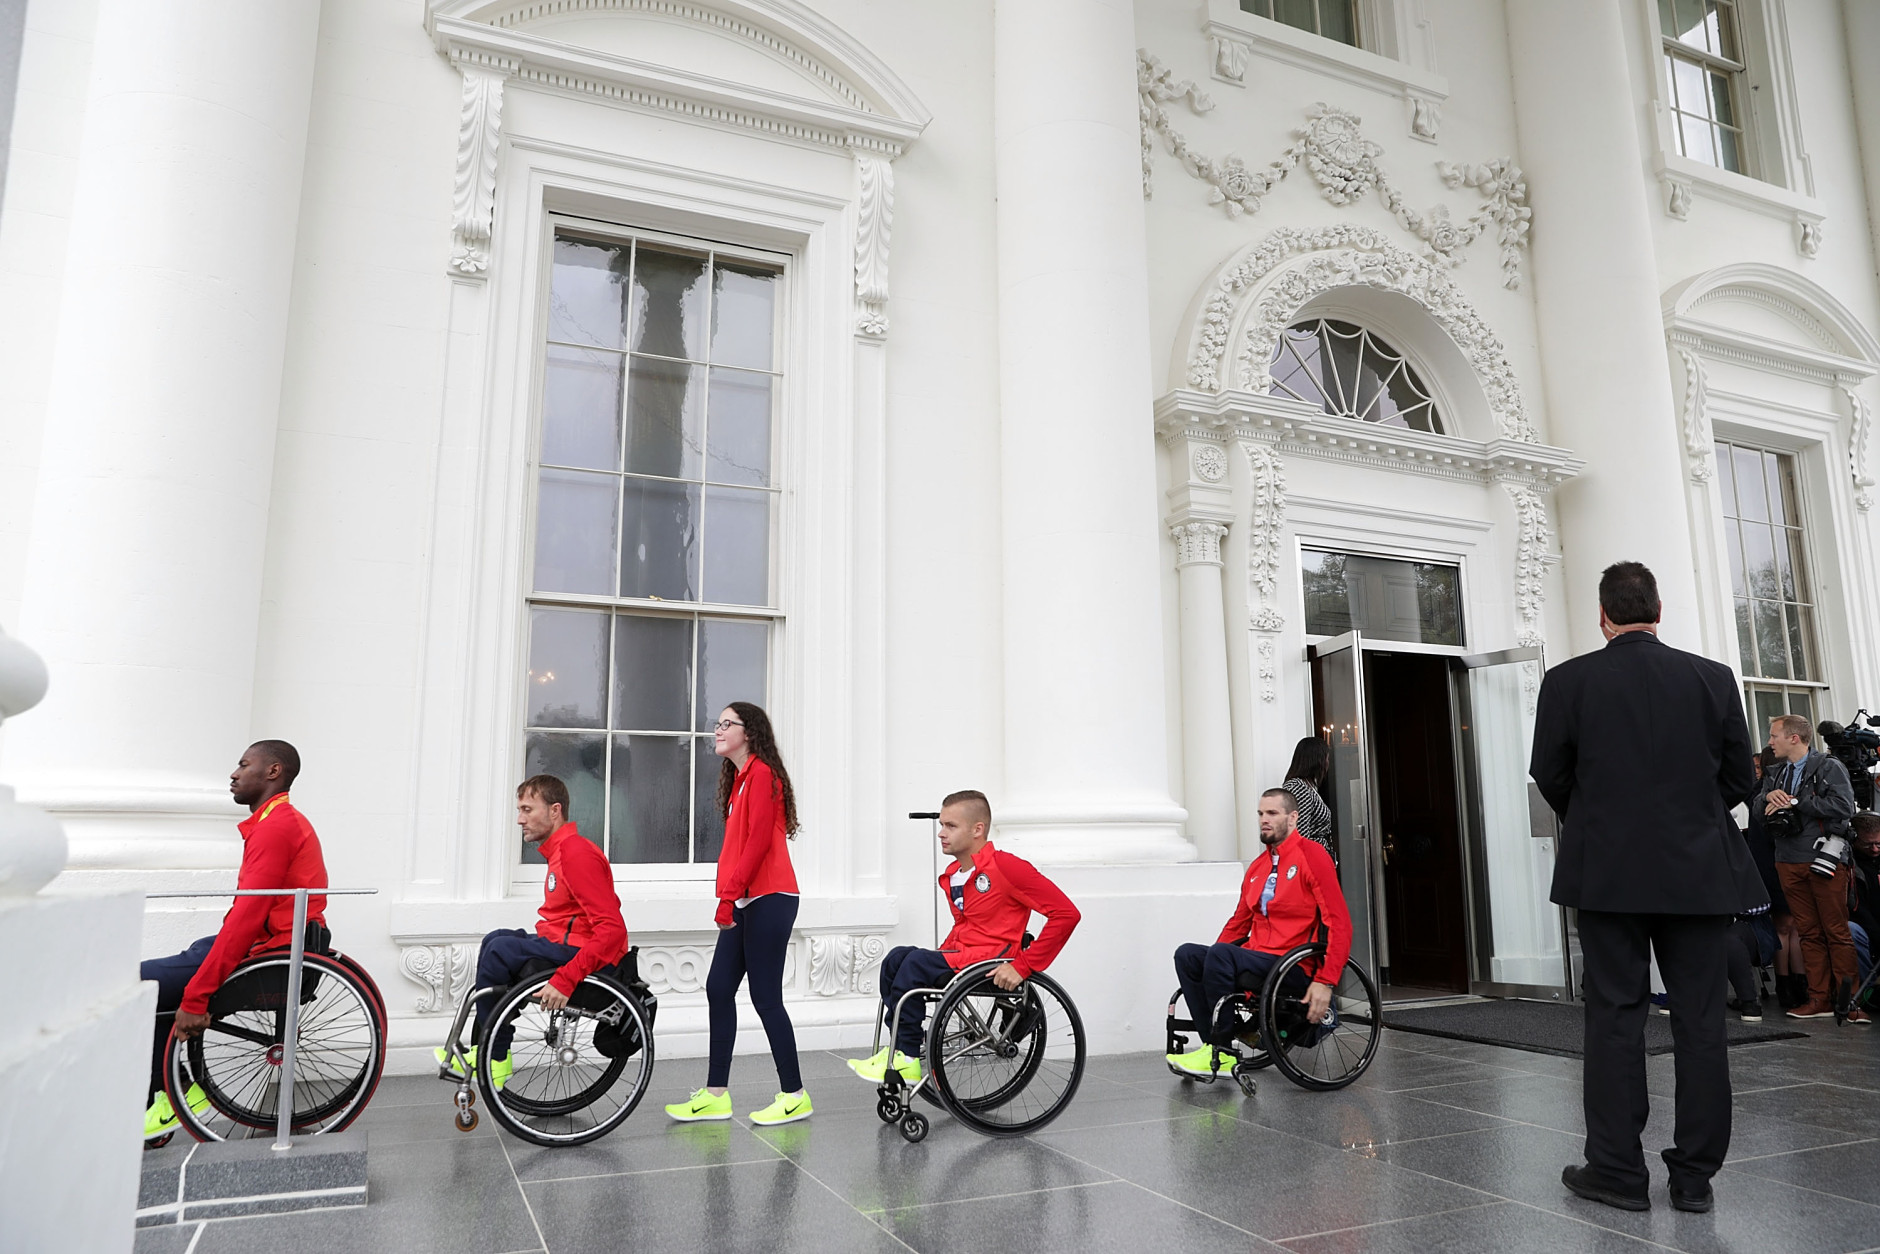 WASHINGTON, DC - SEPTEMBER 29:  Members of the U.S. Paralympic team leave the North Portico after an East Room event at the White House September 29, 2016 in Washington, DC. President Barack Obama and first lady Michelle Obama welcome the 2016 U.S. Olympic and Paralympic teams to the White House to honor their participation and success in the Rio Olympic Games this year.  (Photo by Alex Wong/Getty Images)